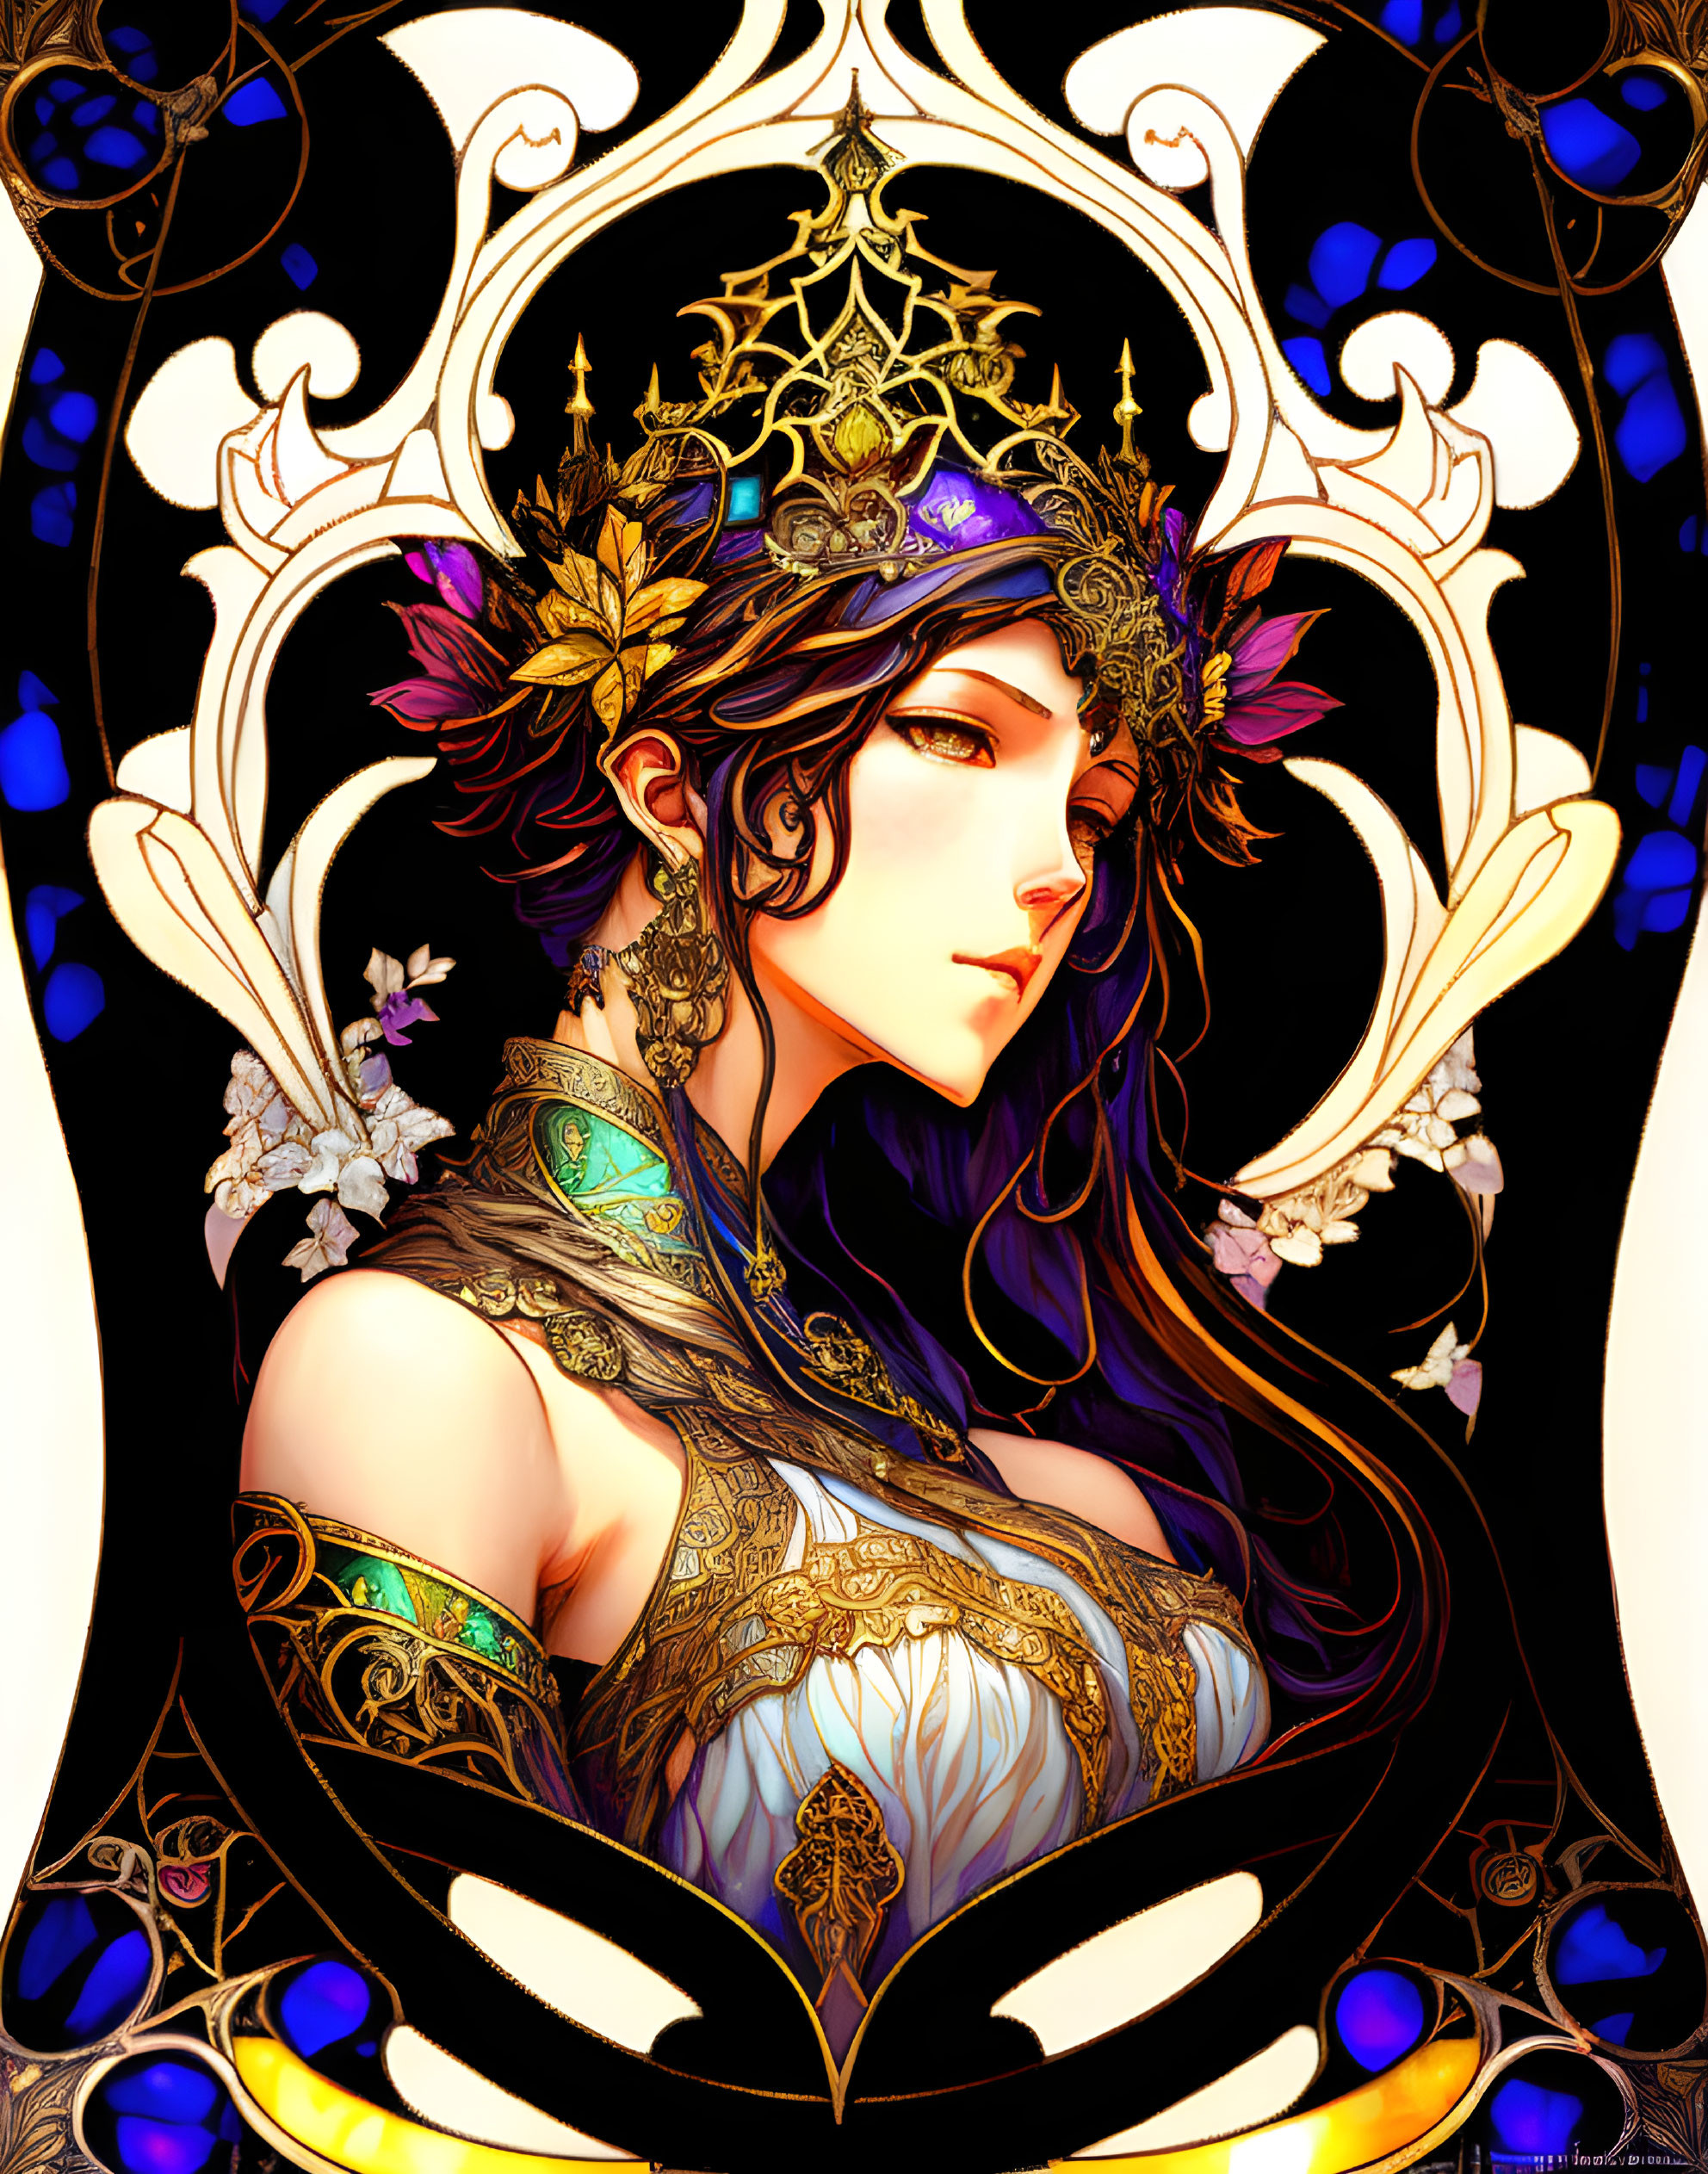 Regal woman with crown and ornate jewelry in stained glass border